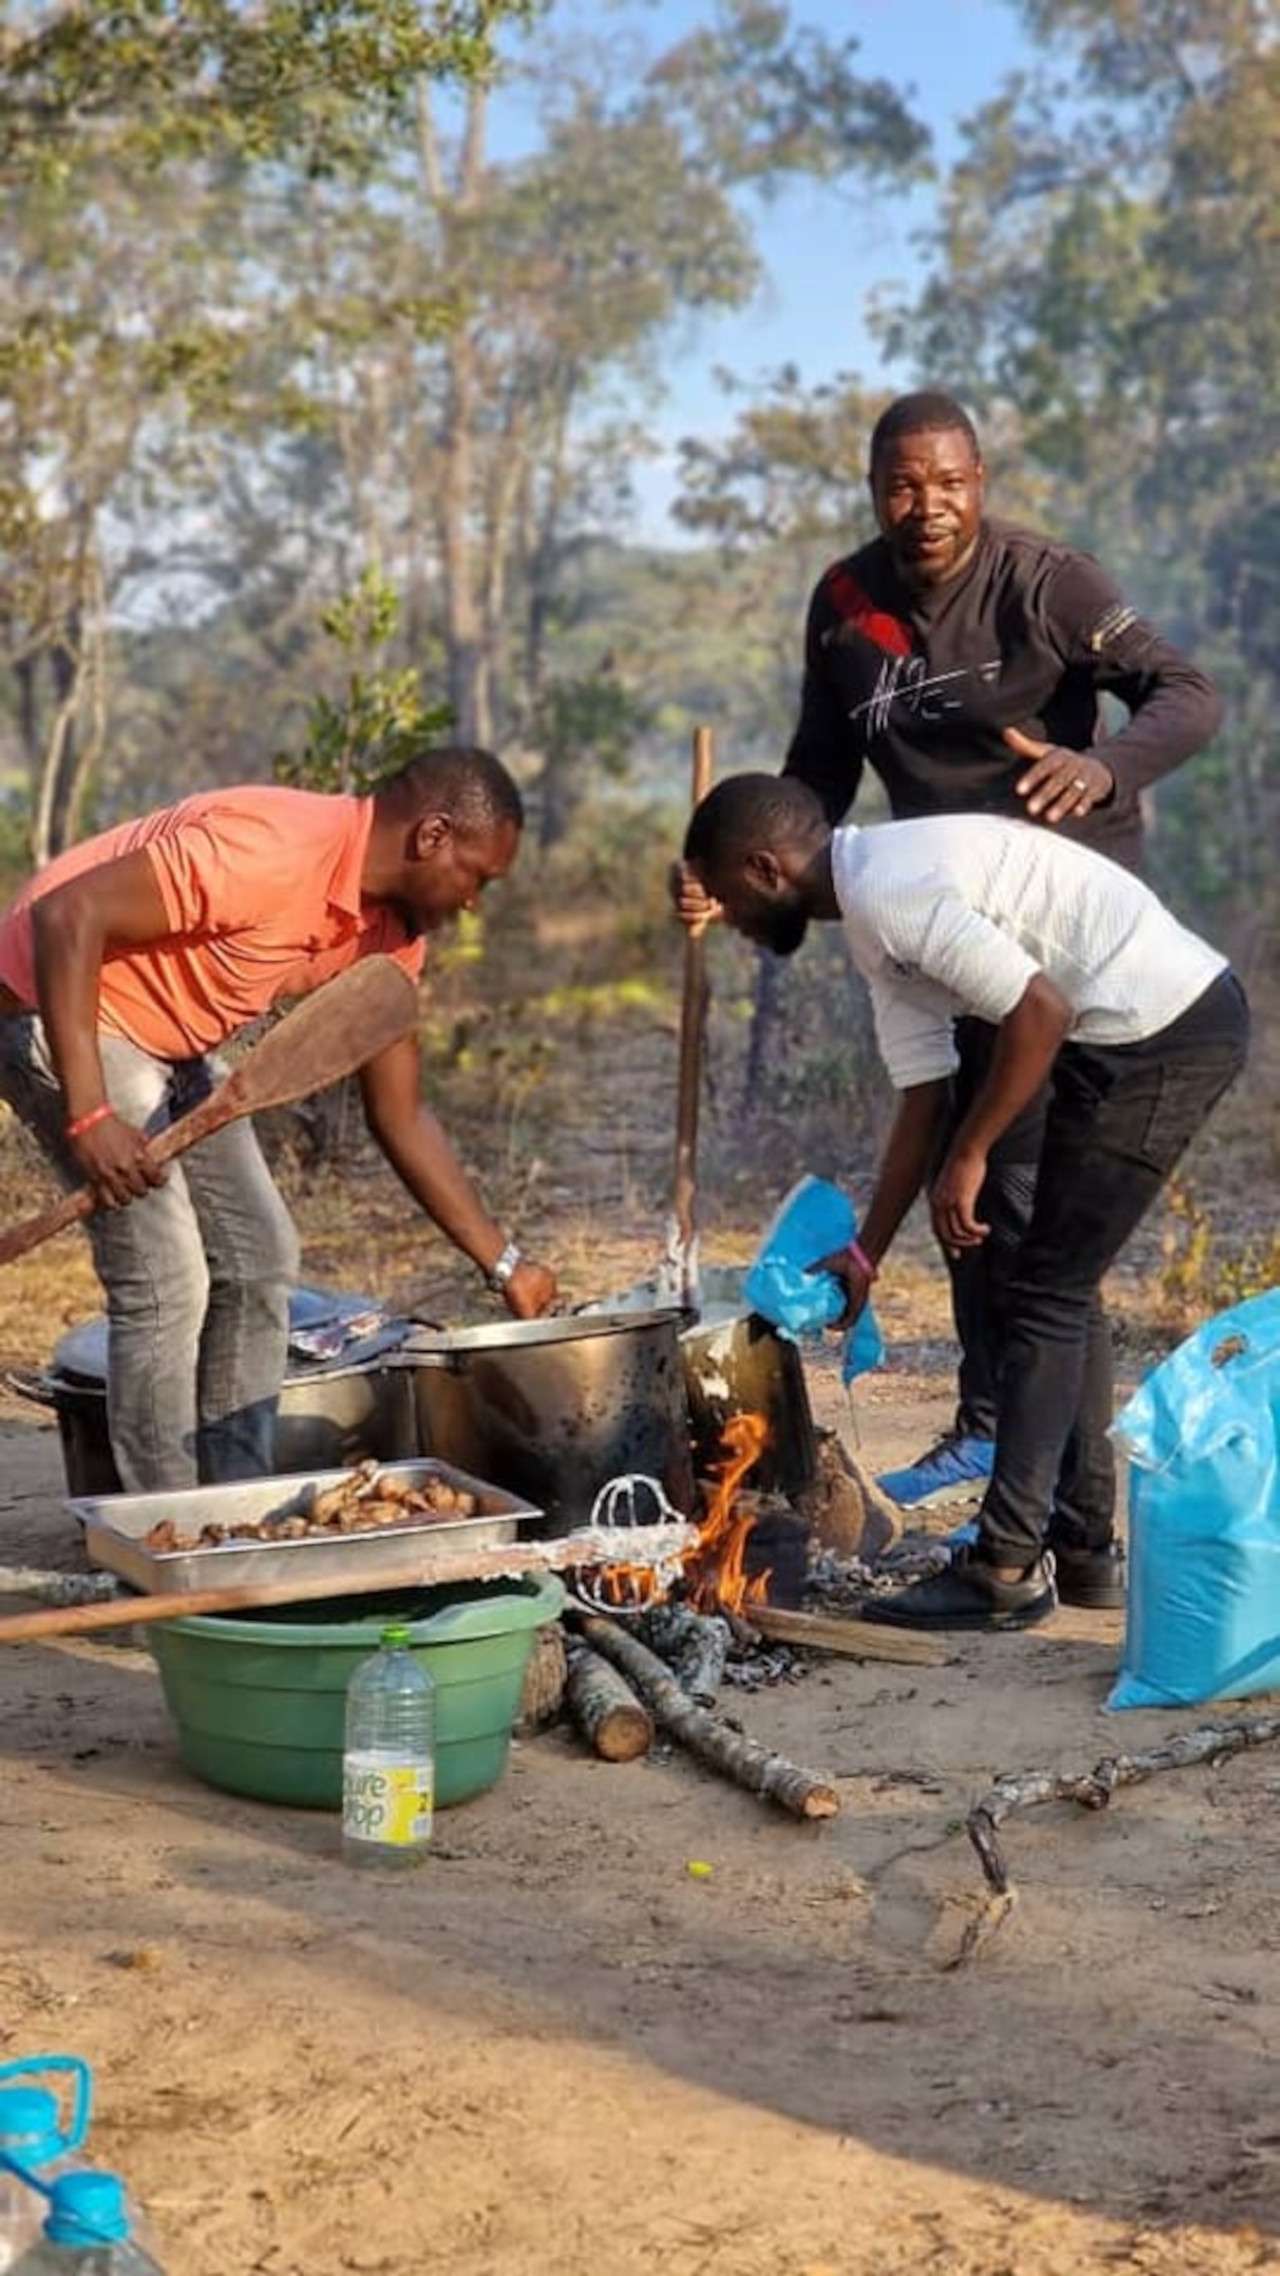 PICS| Humble Prophet Walter Magaya Touches Hearts with Acts of Service: Cooking Sadza for Faithful Congregants